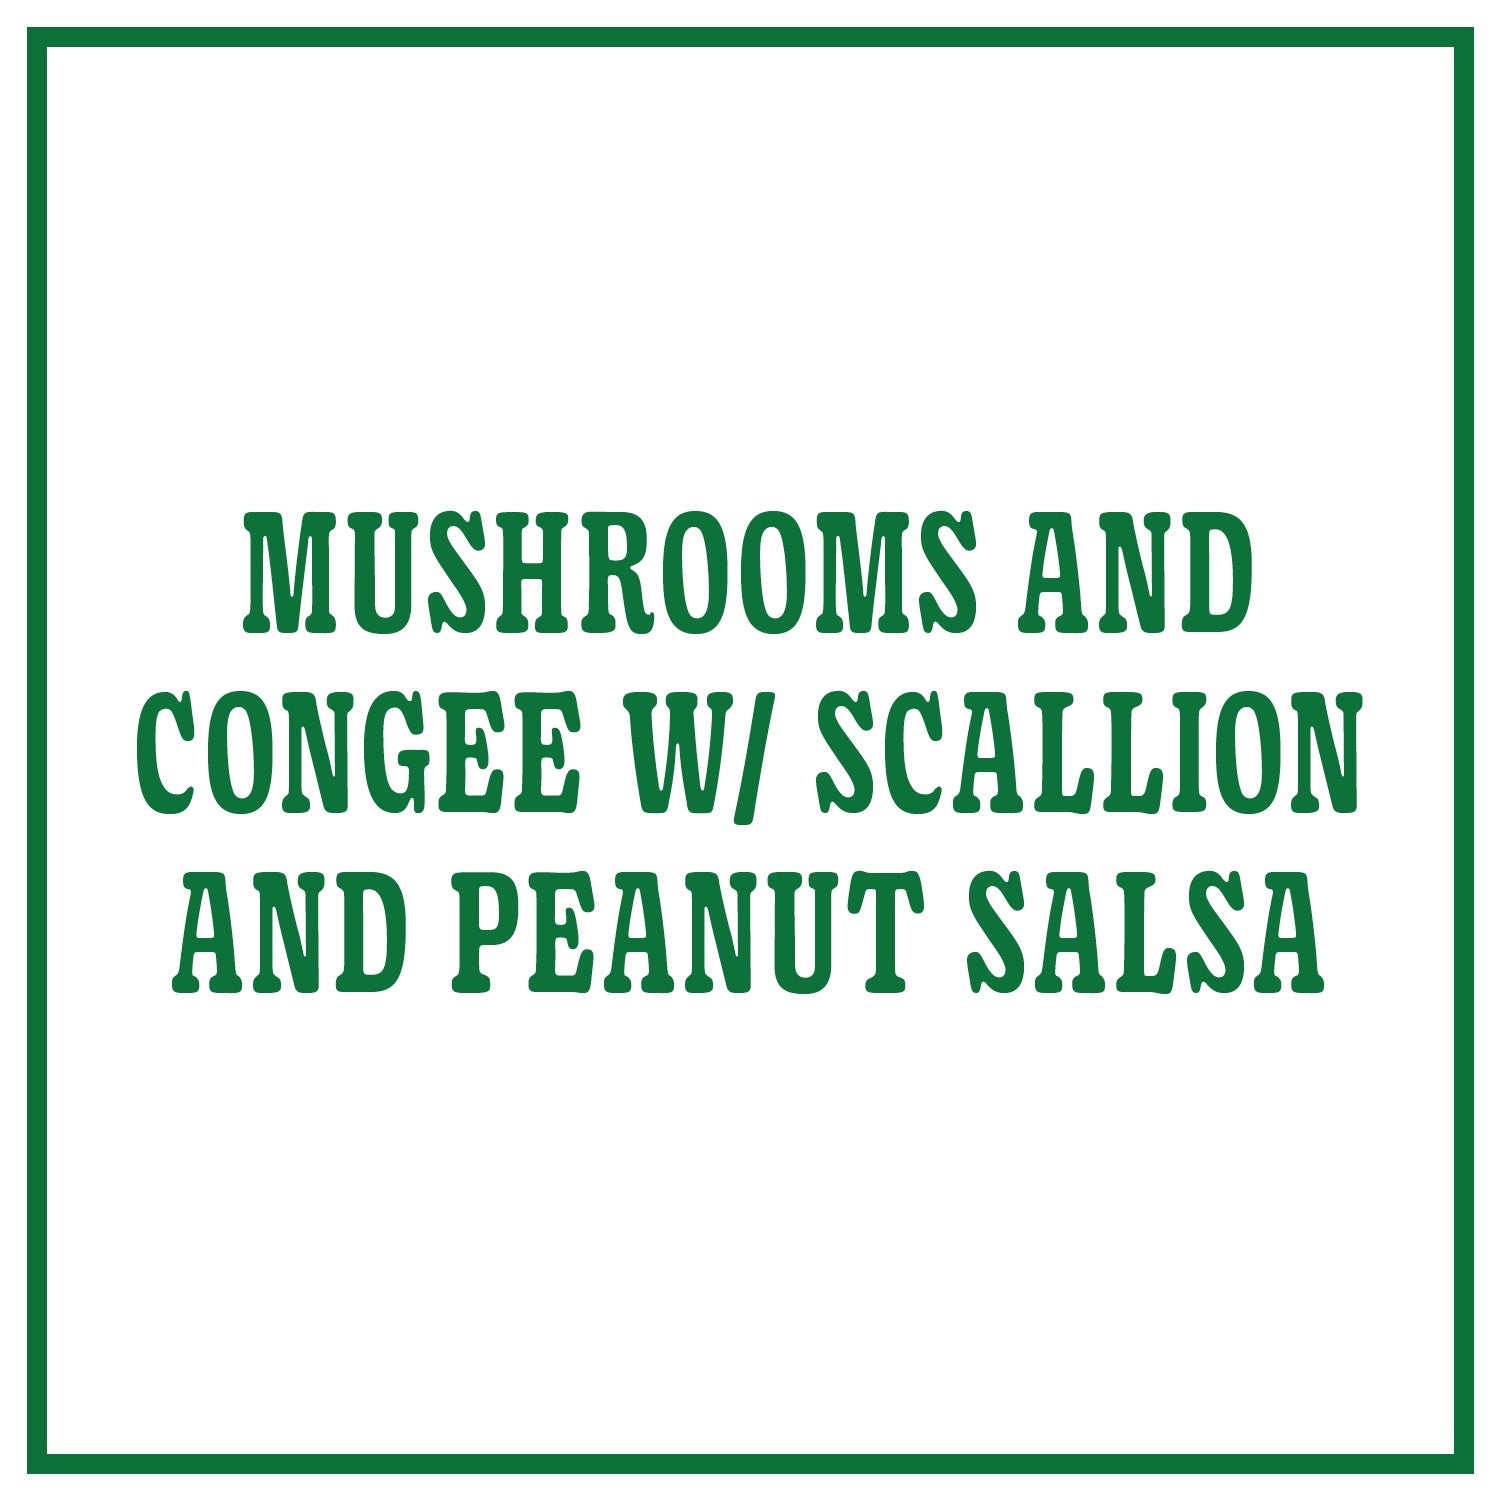 Mushrooms and Congee with Scallion and Peanut Salsa